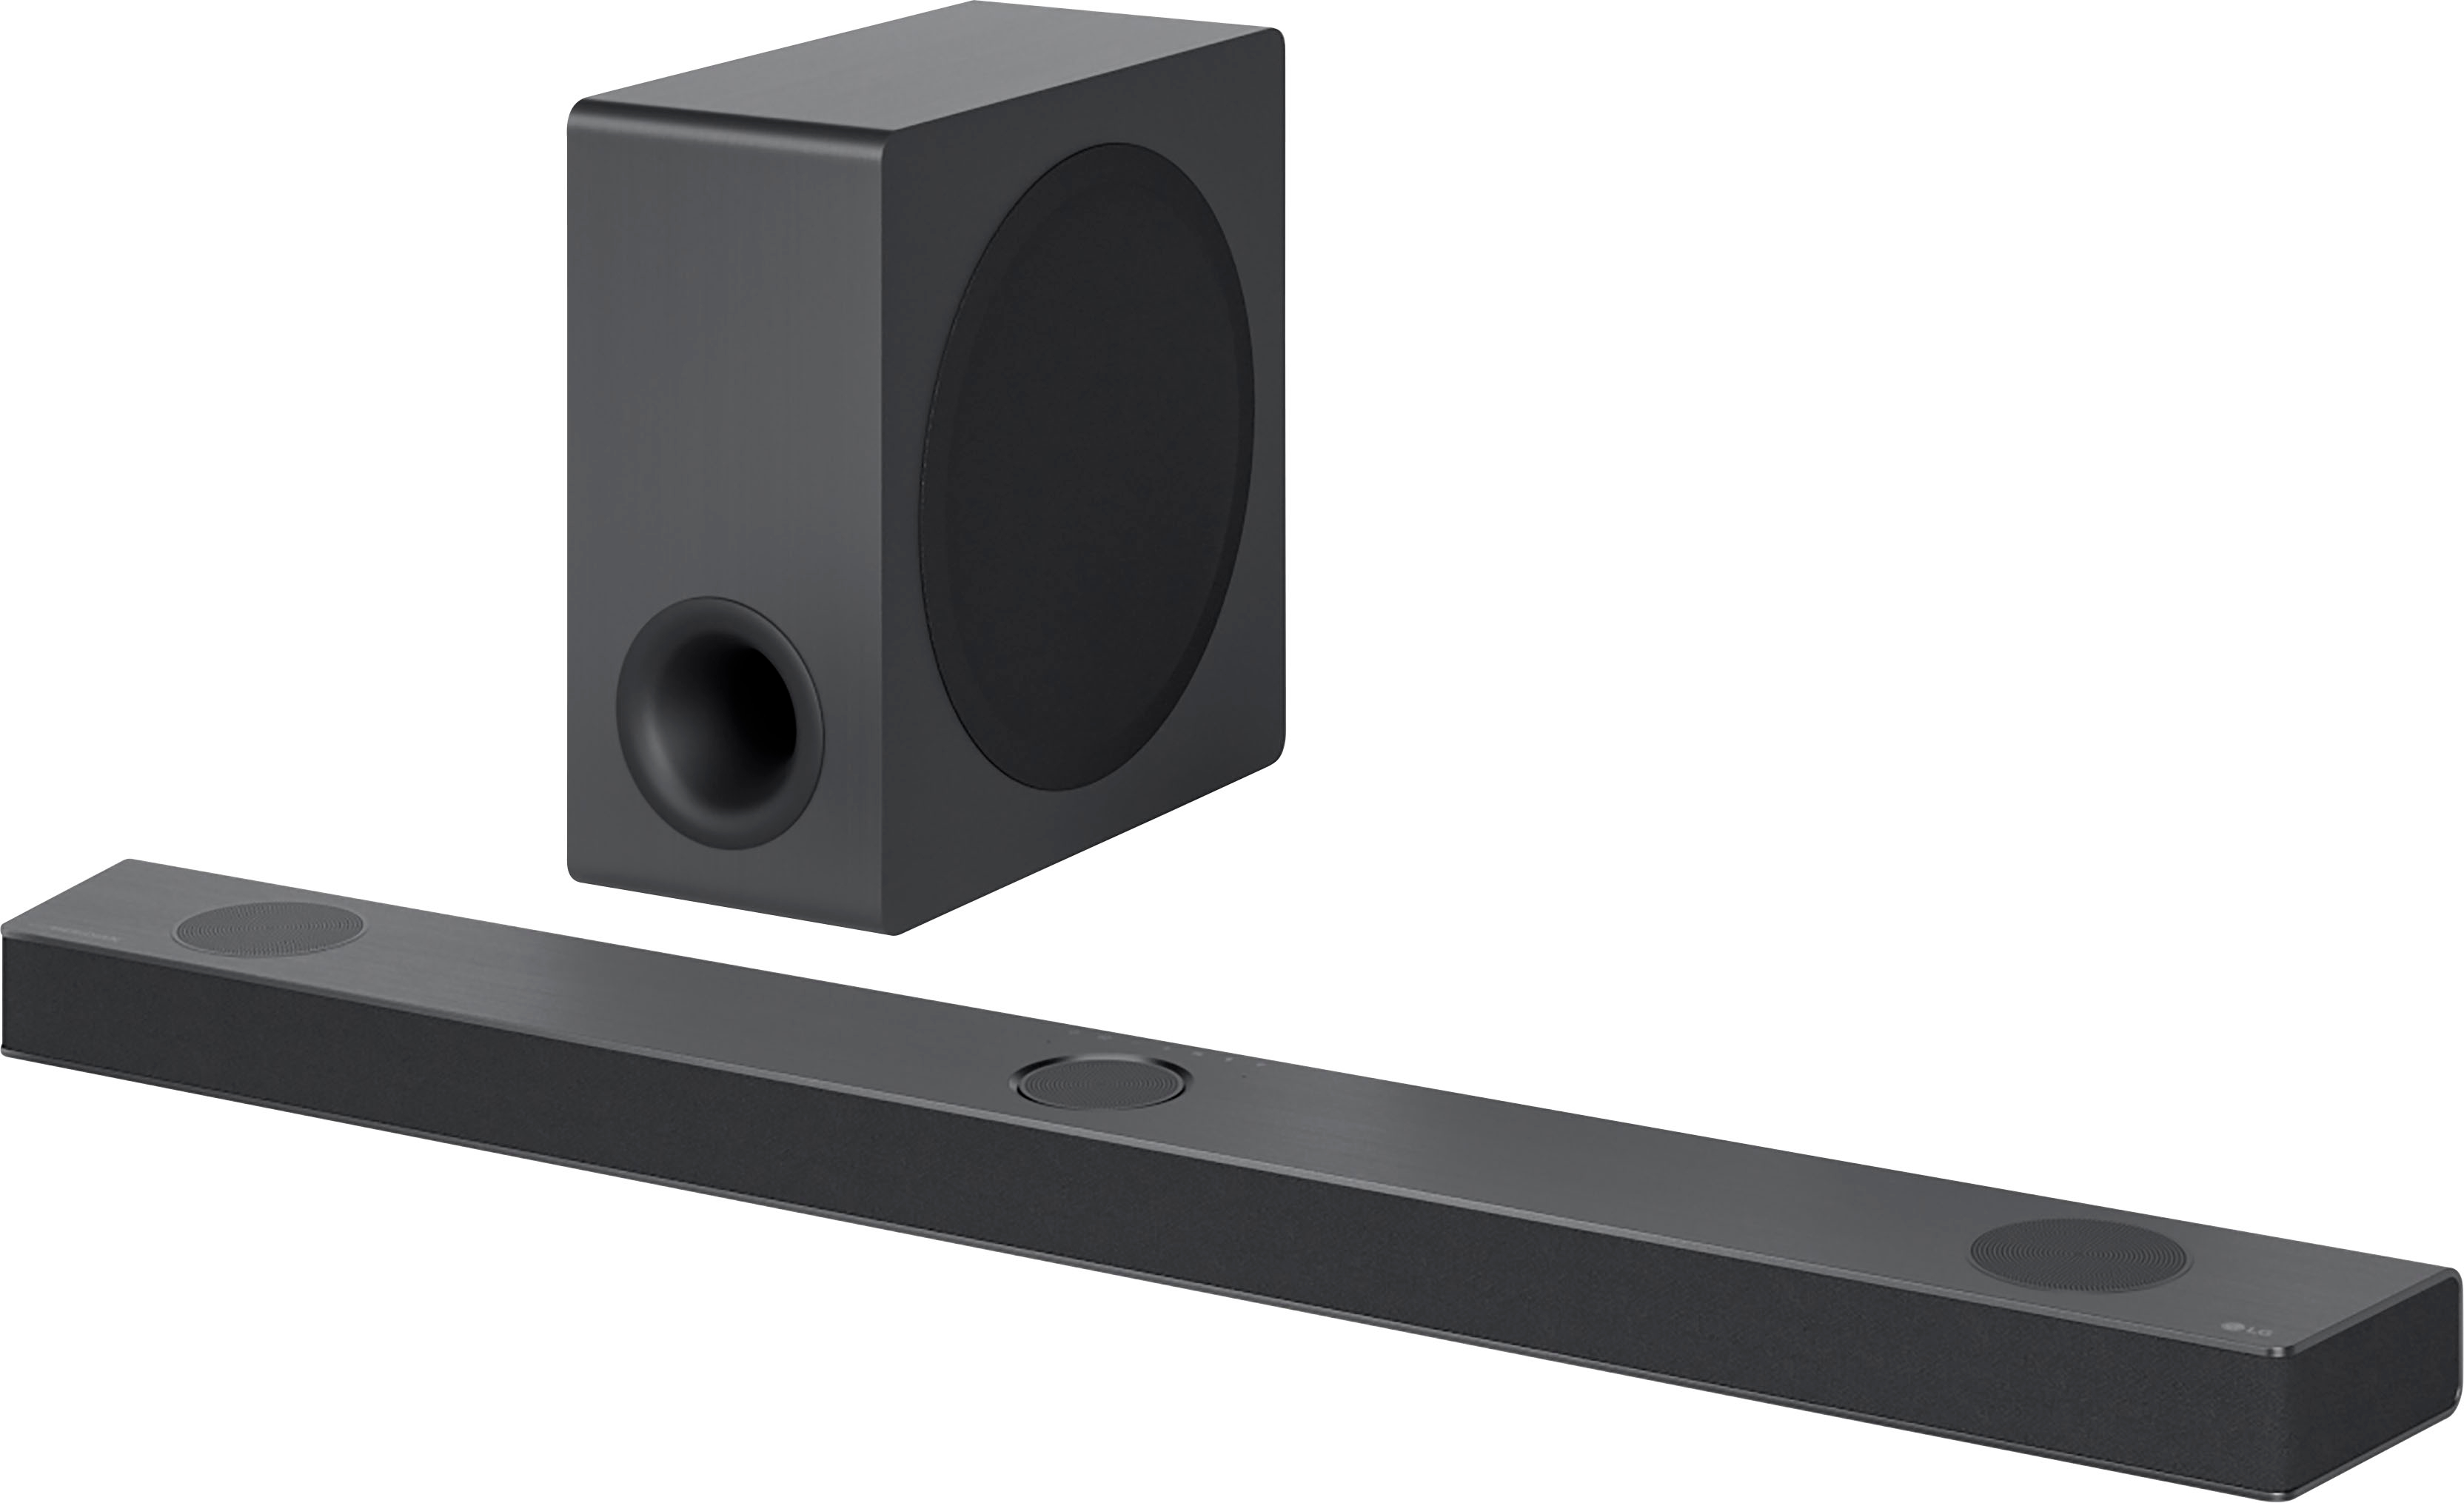 Angle View: Nakamichi - 7.2.4-Channel 800W Soundbar System with Dual 8" Wireless Subwoofers and Dolby Atmos - Black